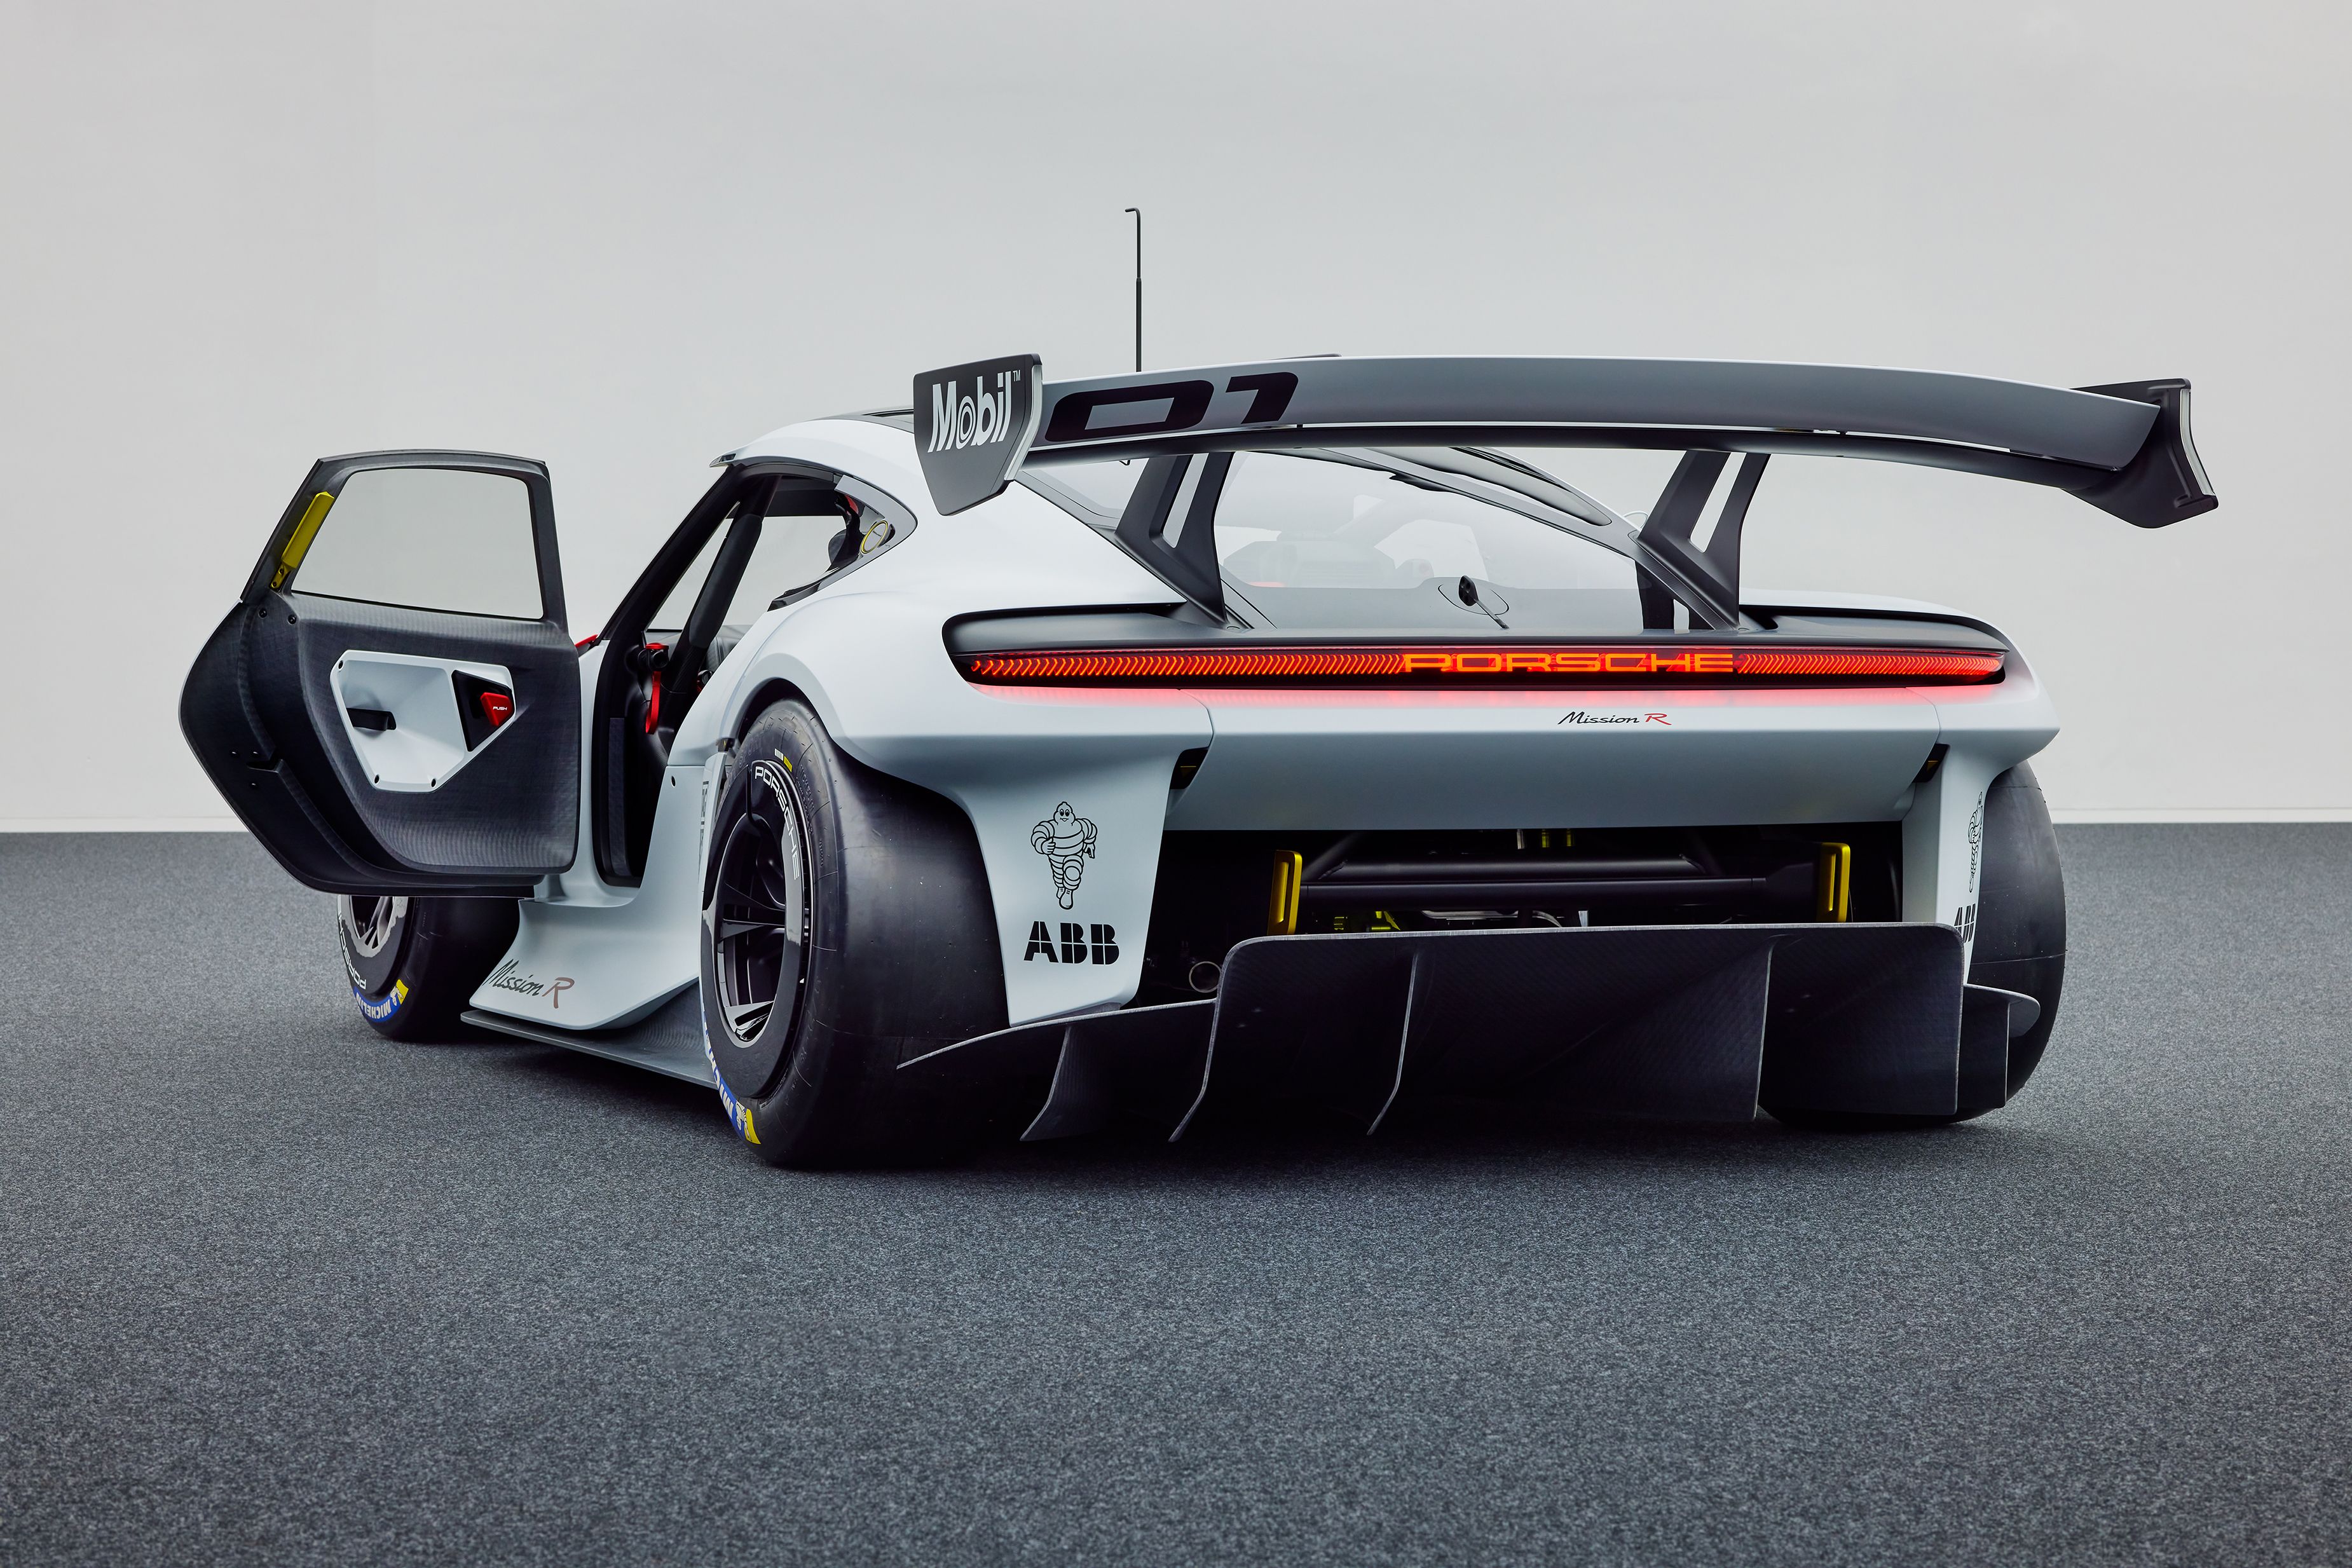 New Porsche Mission R Is A 1,073 HP Electric Racing Car That Hints